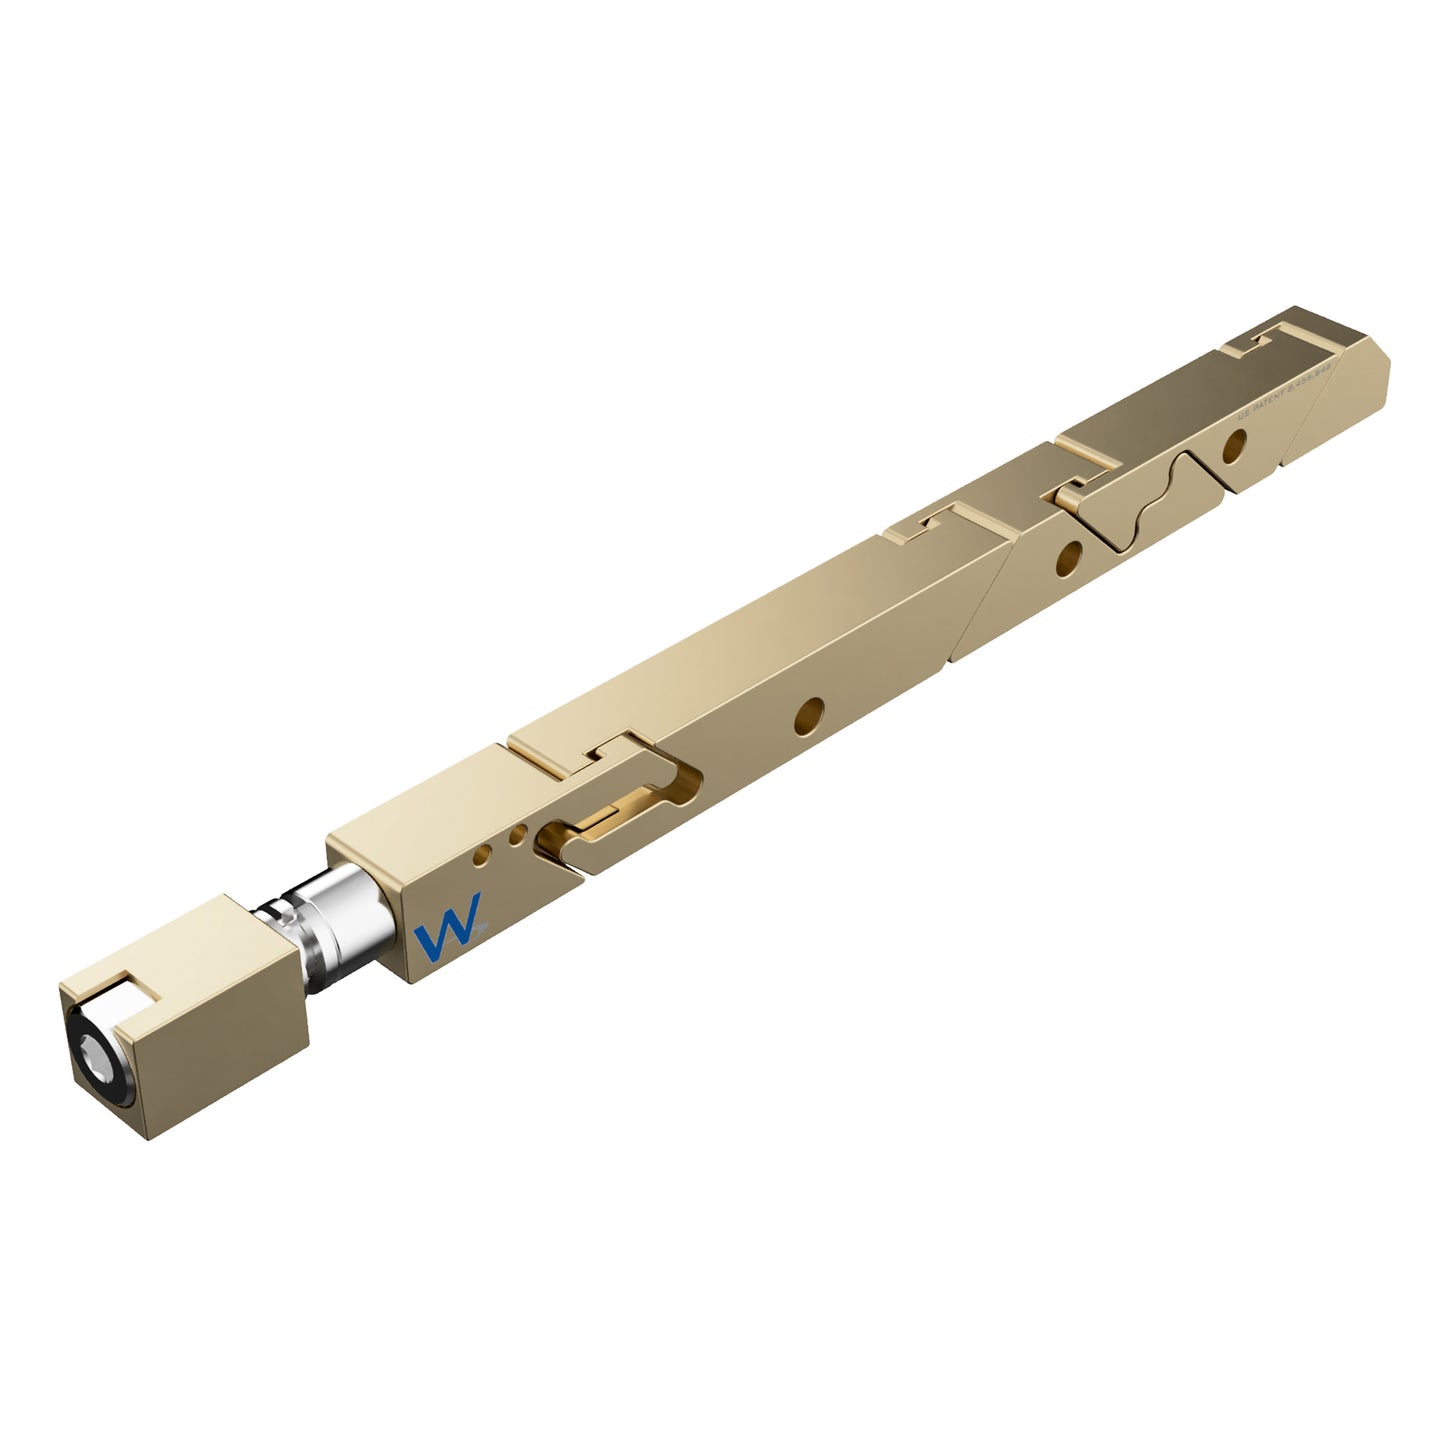 SW5-37-270-250 High Force Wedgelock, segmented long rectulangular hardware component, Gold Chemical Film Finish